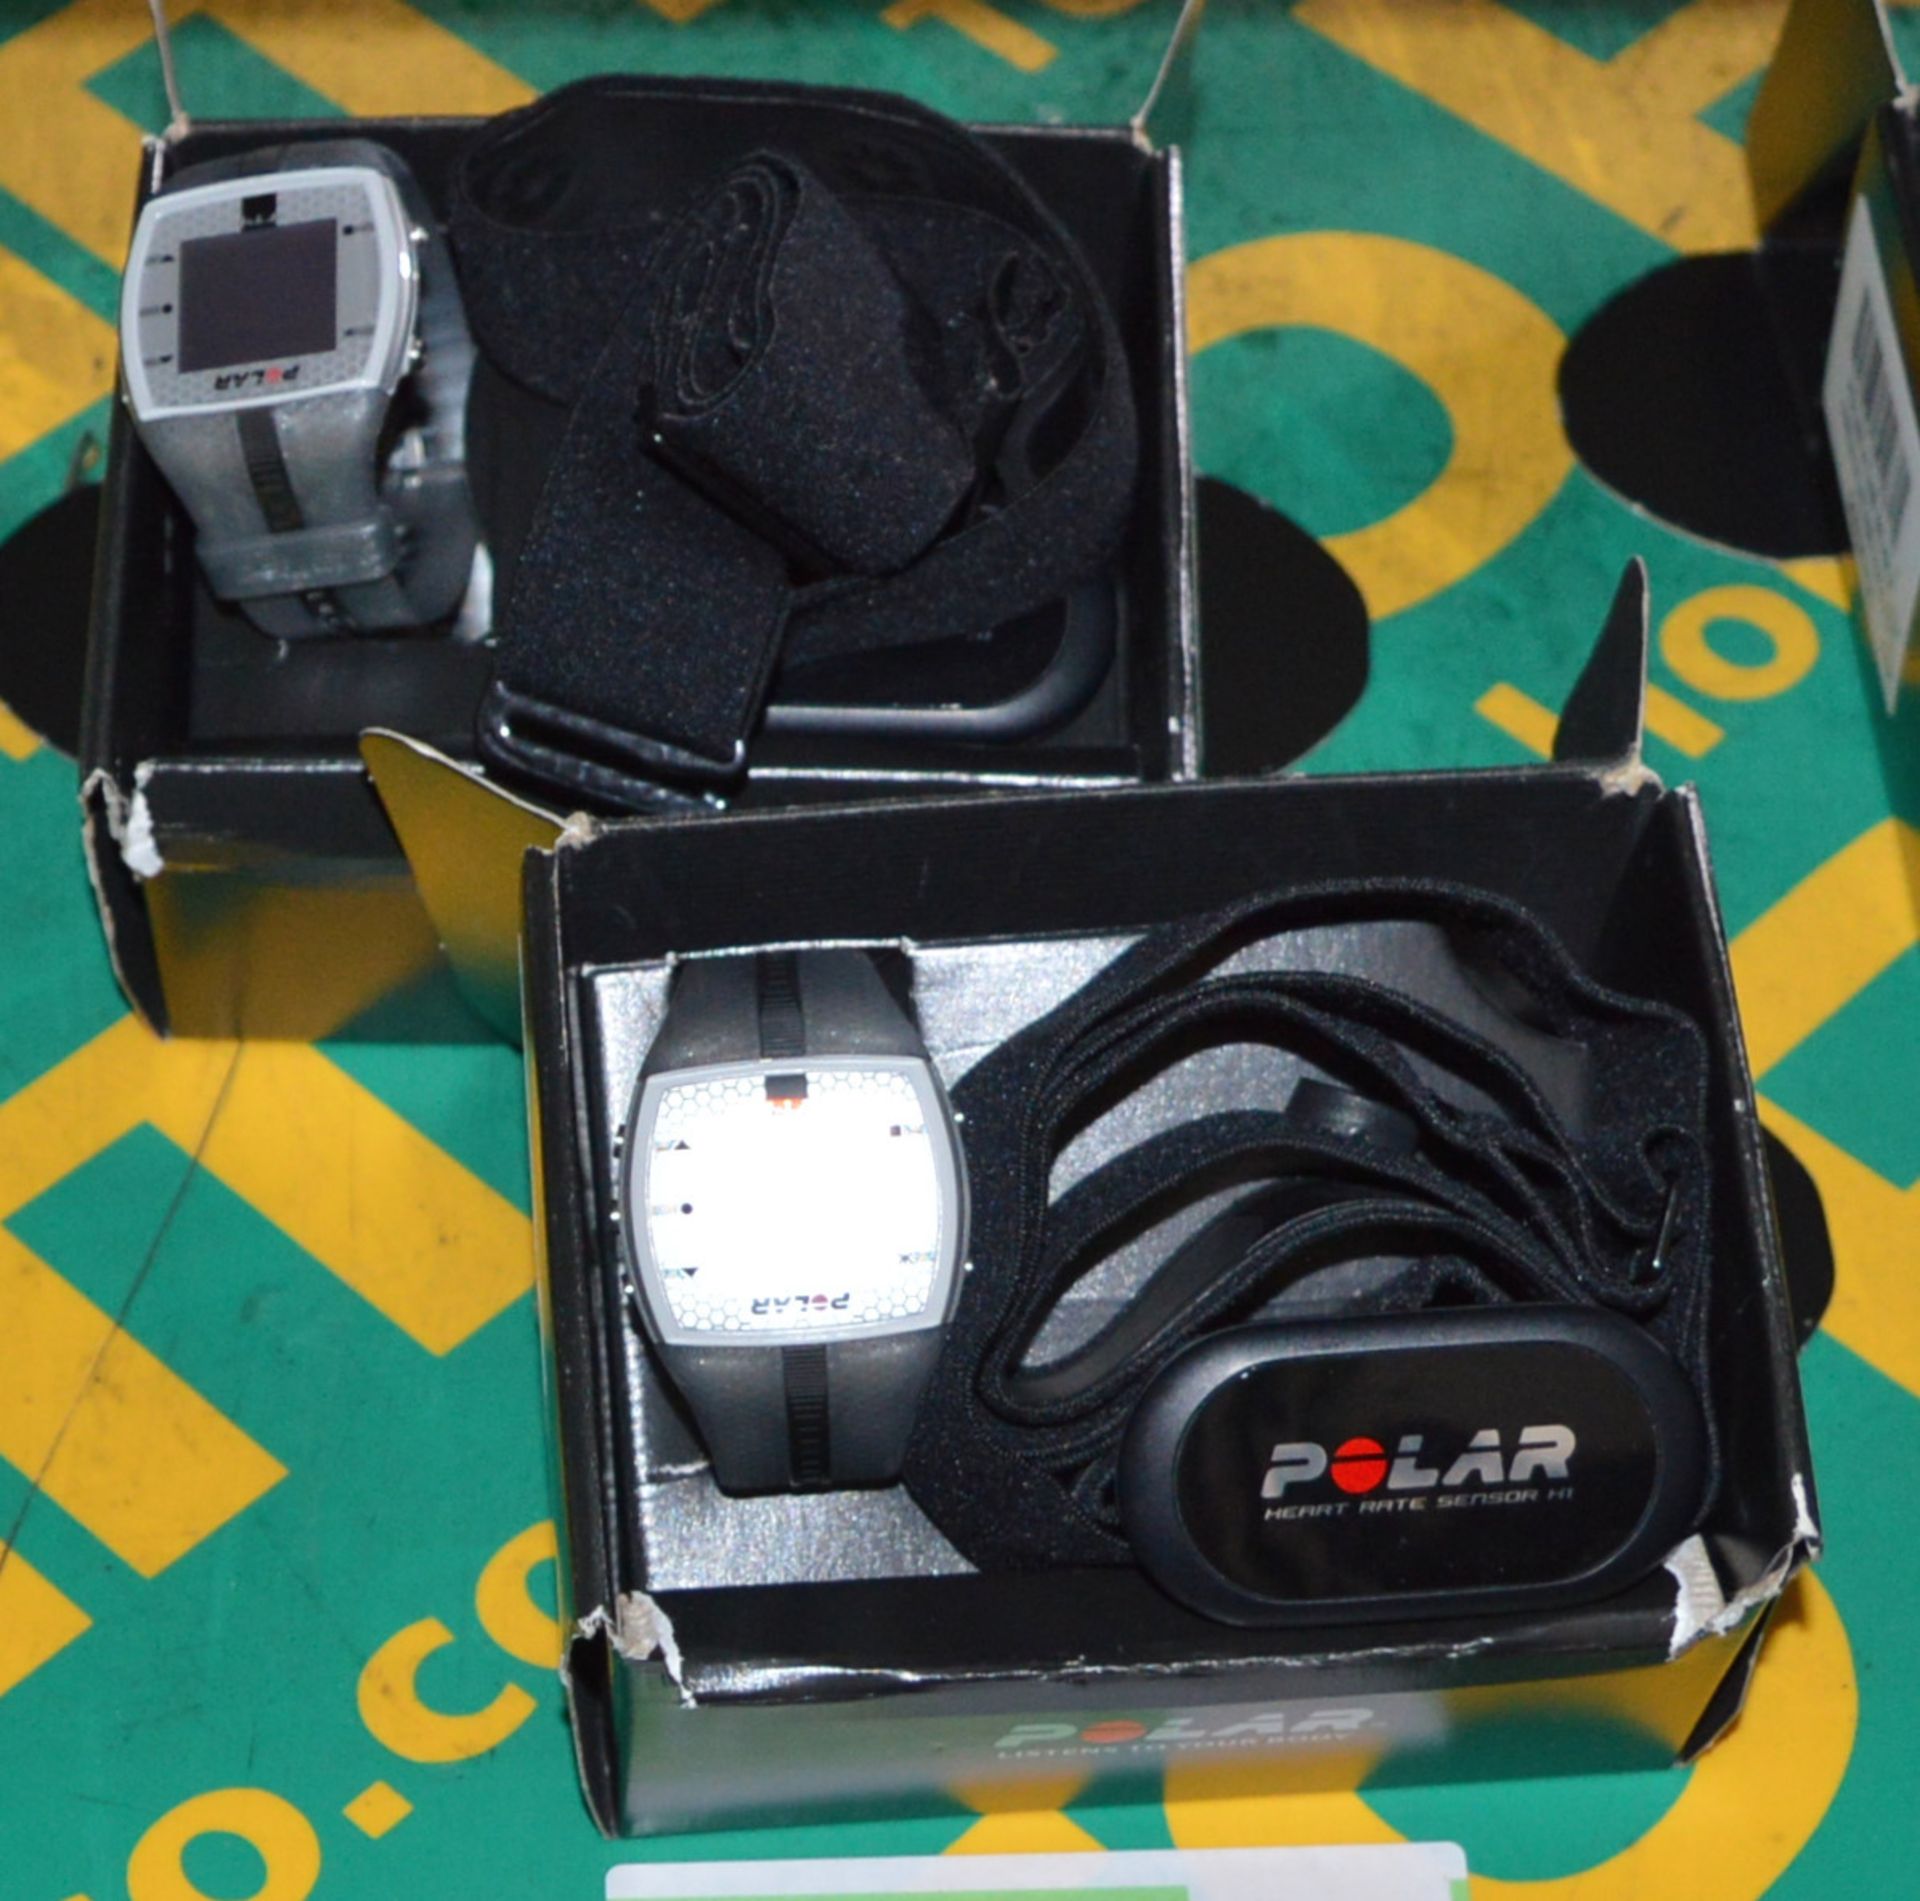 2x Polar FT4M Heart Rate Monitor & Sports Watches - Image 2 of 2